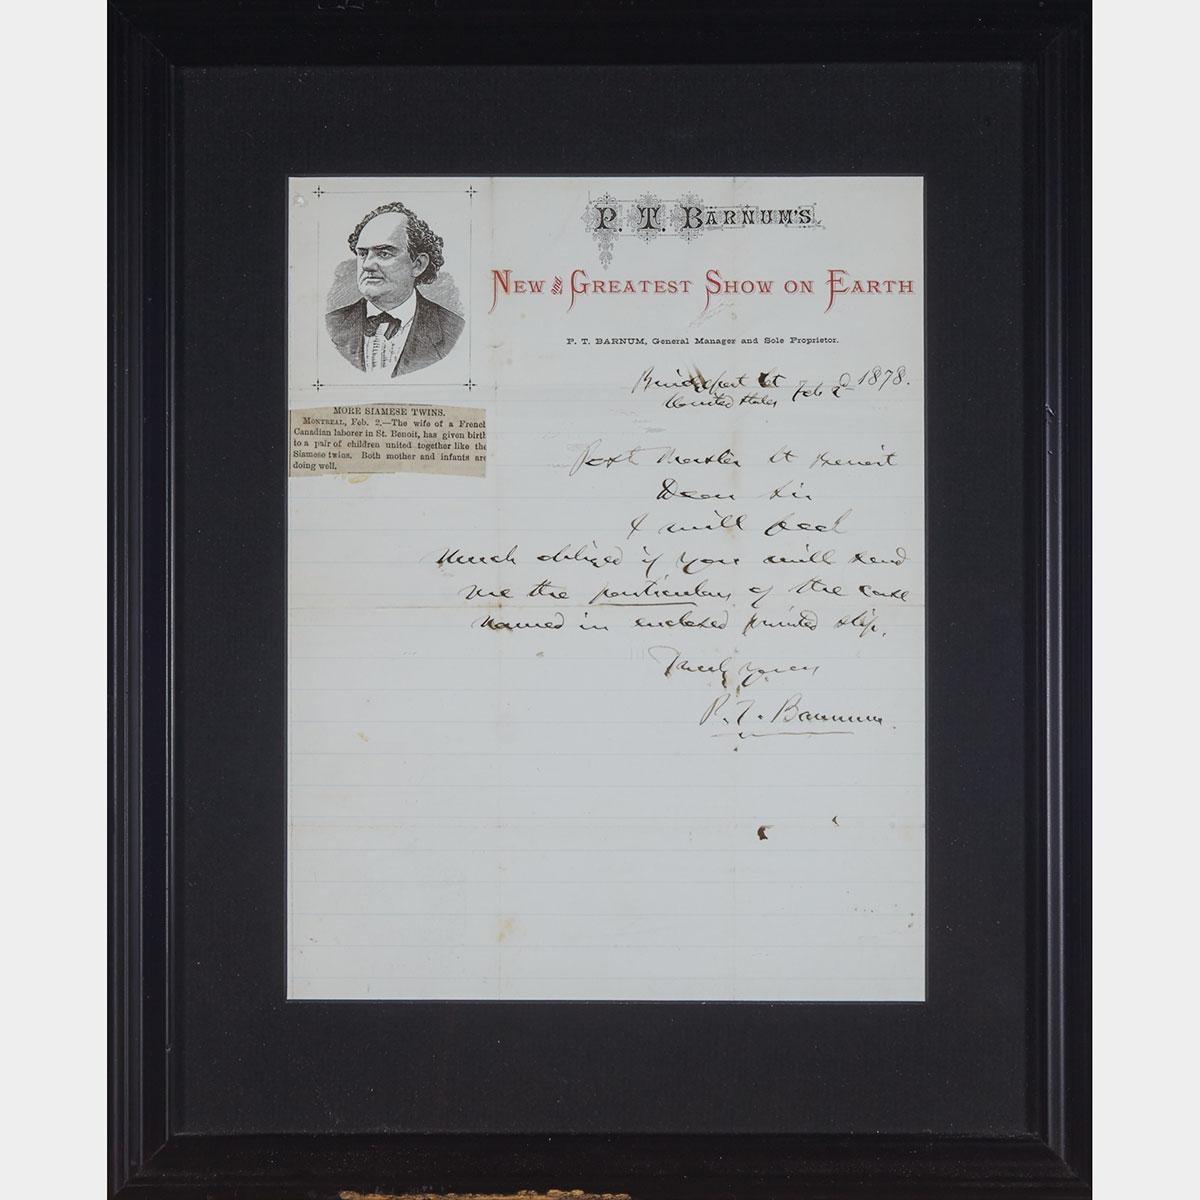 Letter Signed by P. T. Barnum, 1878